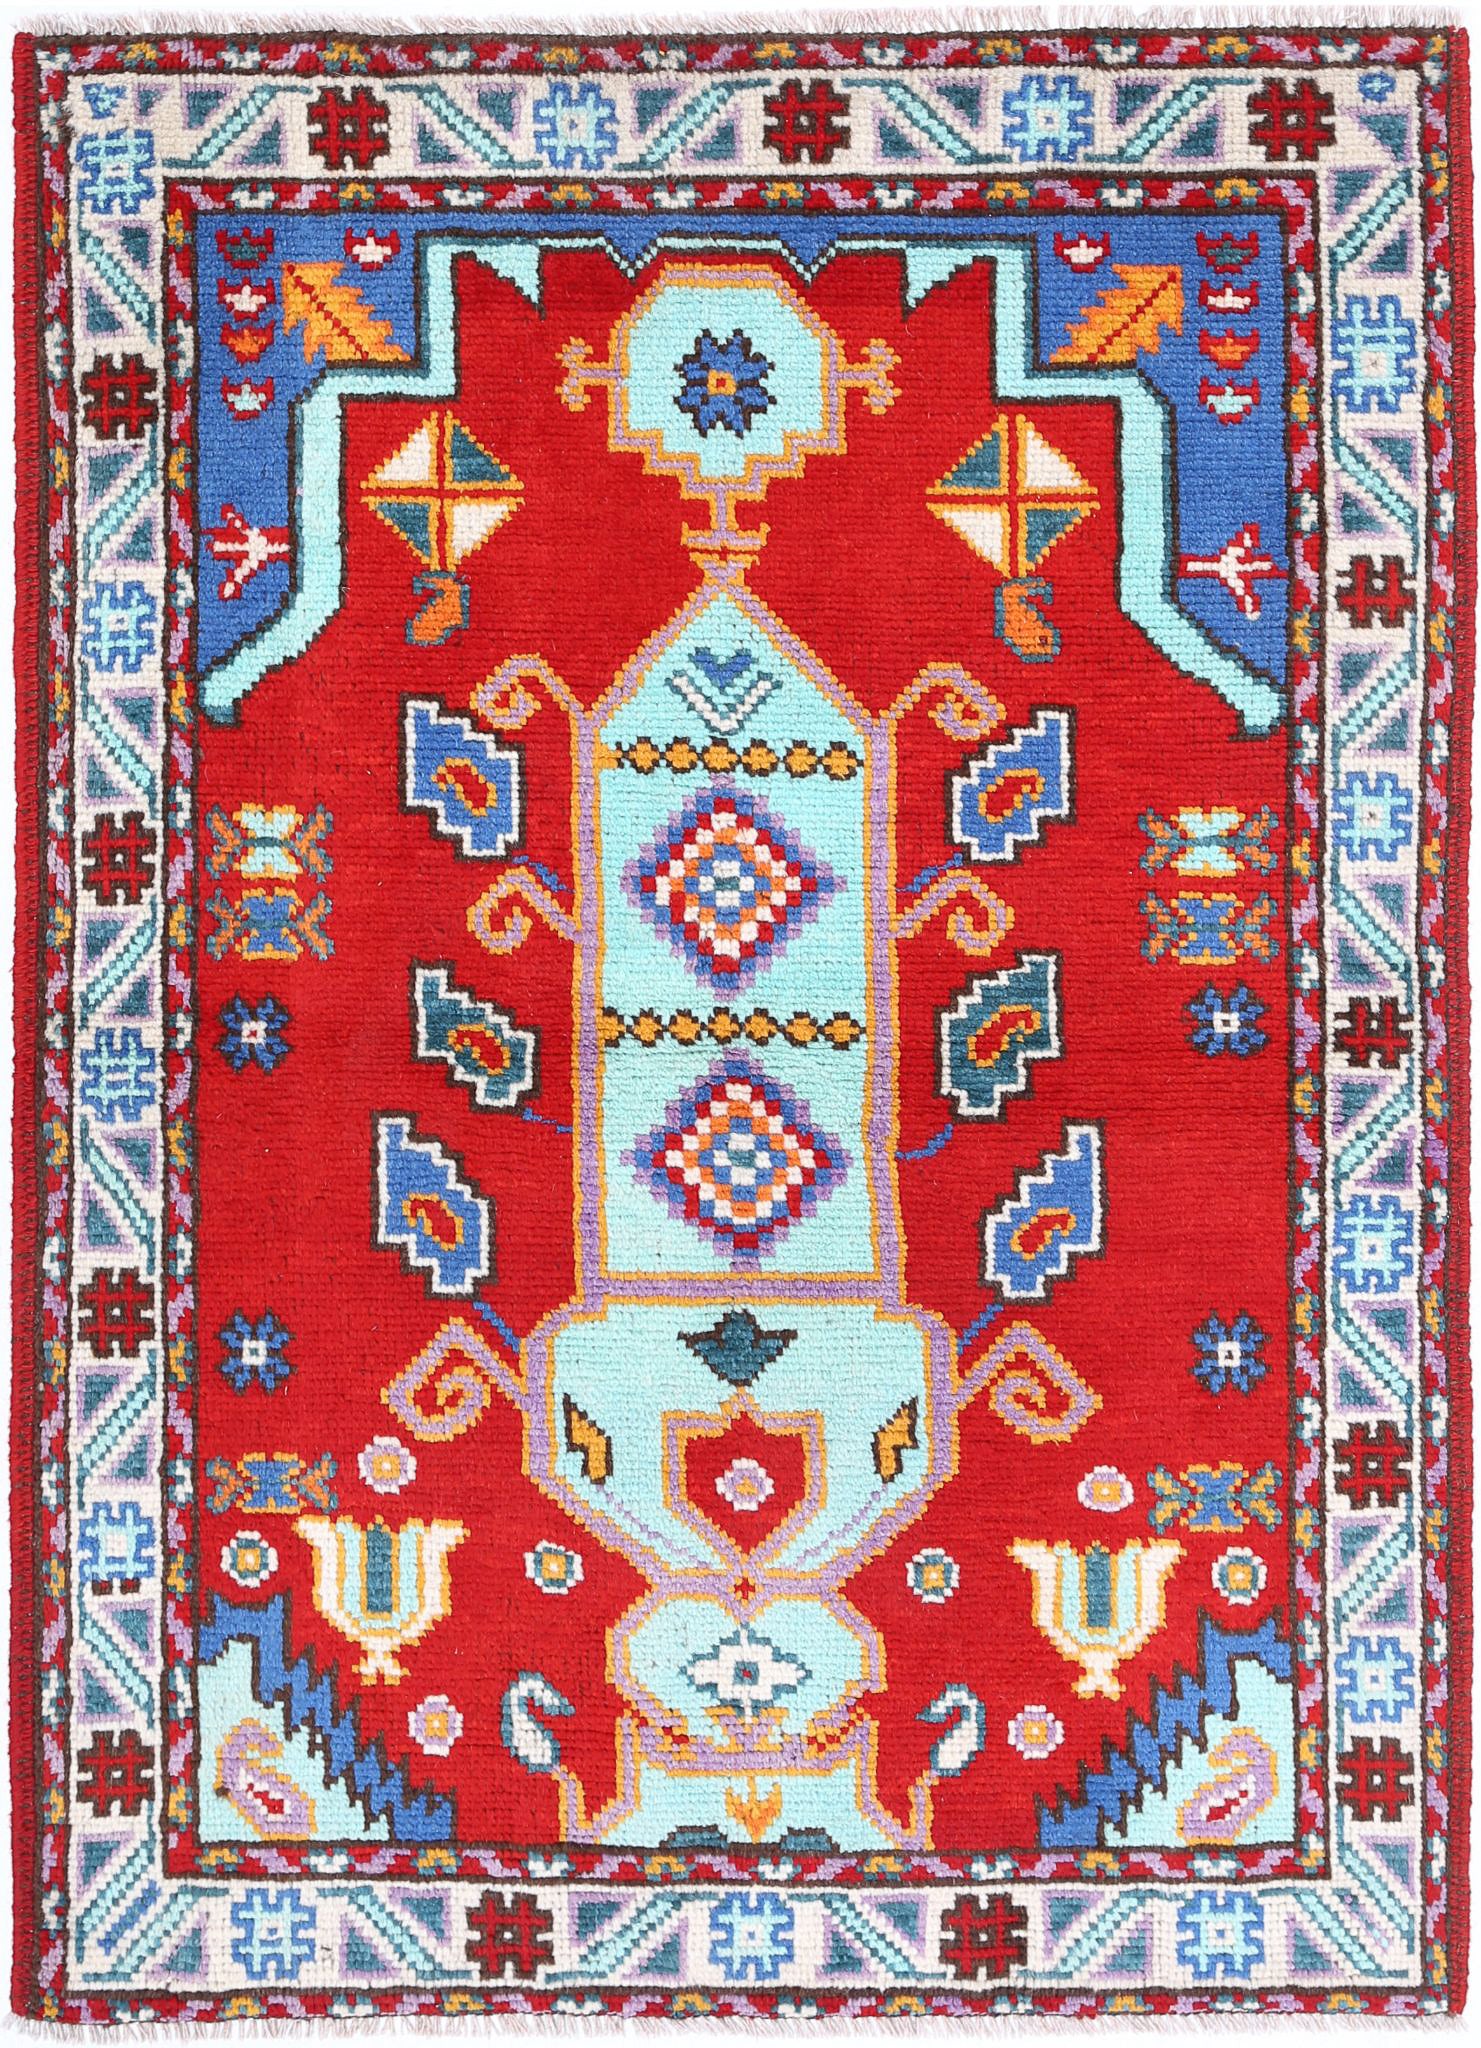 Revival-hand-knotted-qarghani-wool-rug-5014200.jpg